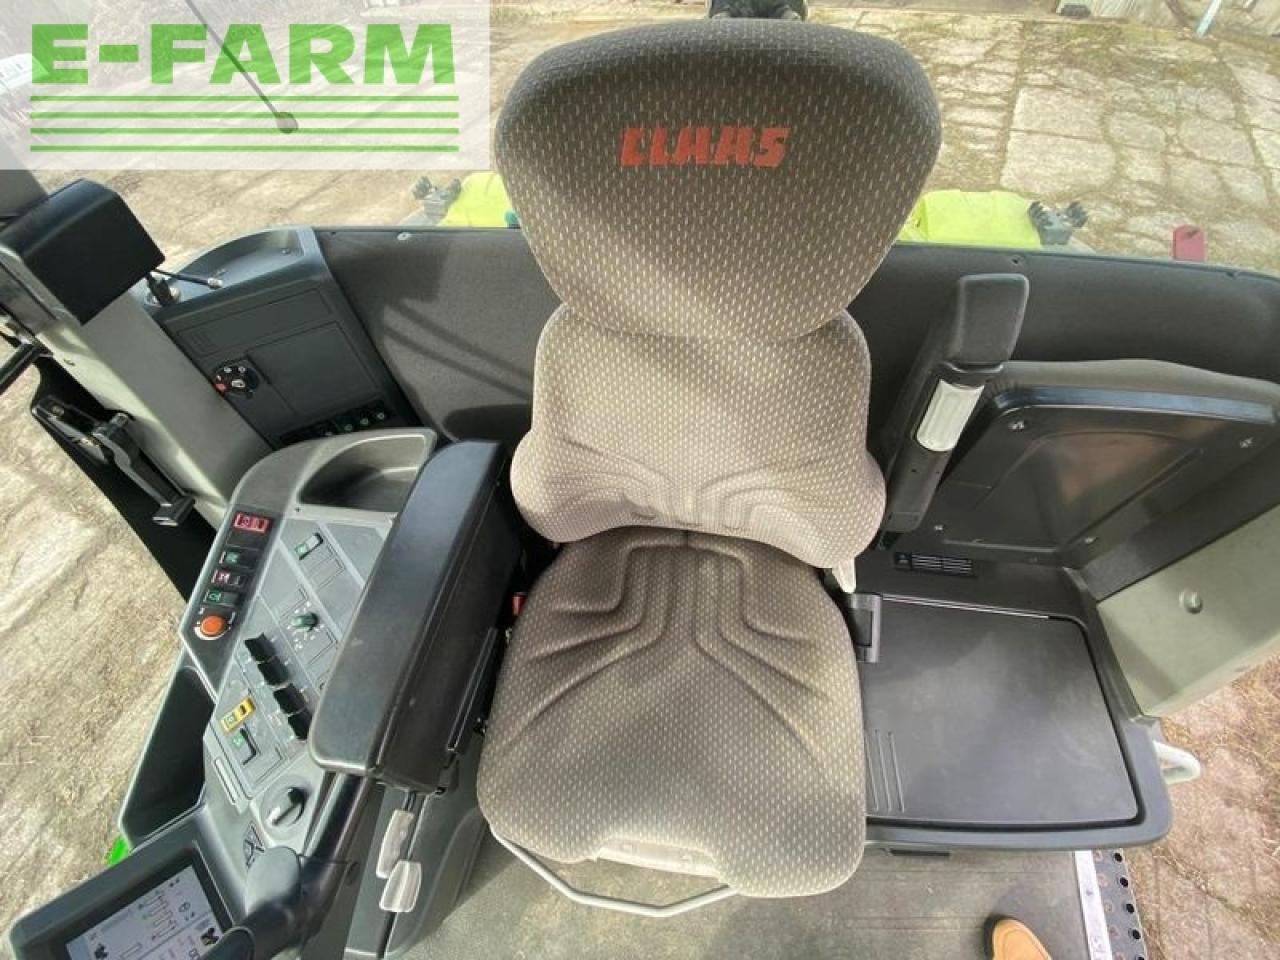 Tracteur agricole CLAAS xerion 3800 vc: photos 38